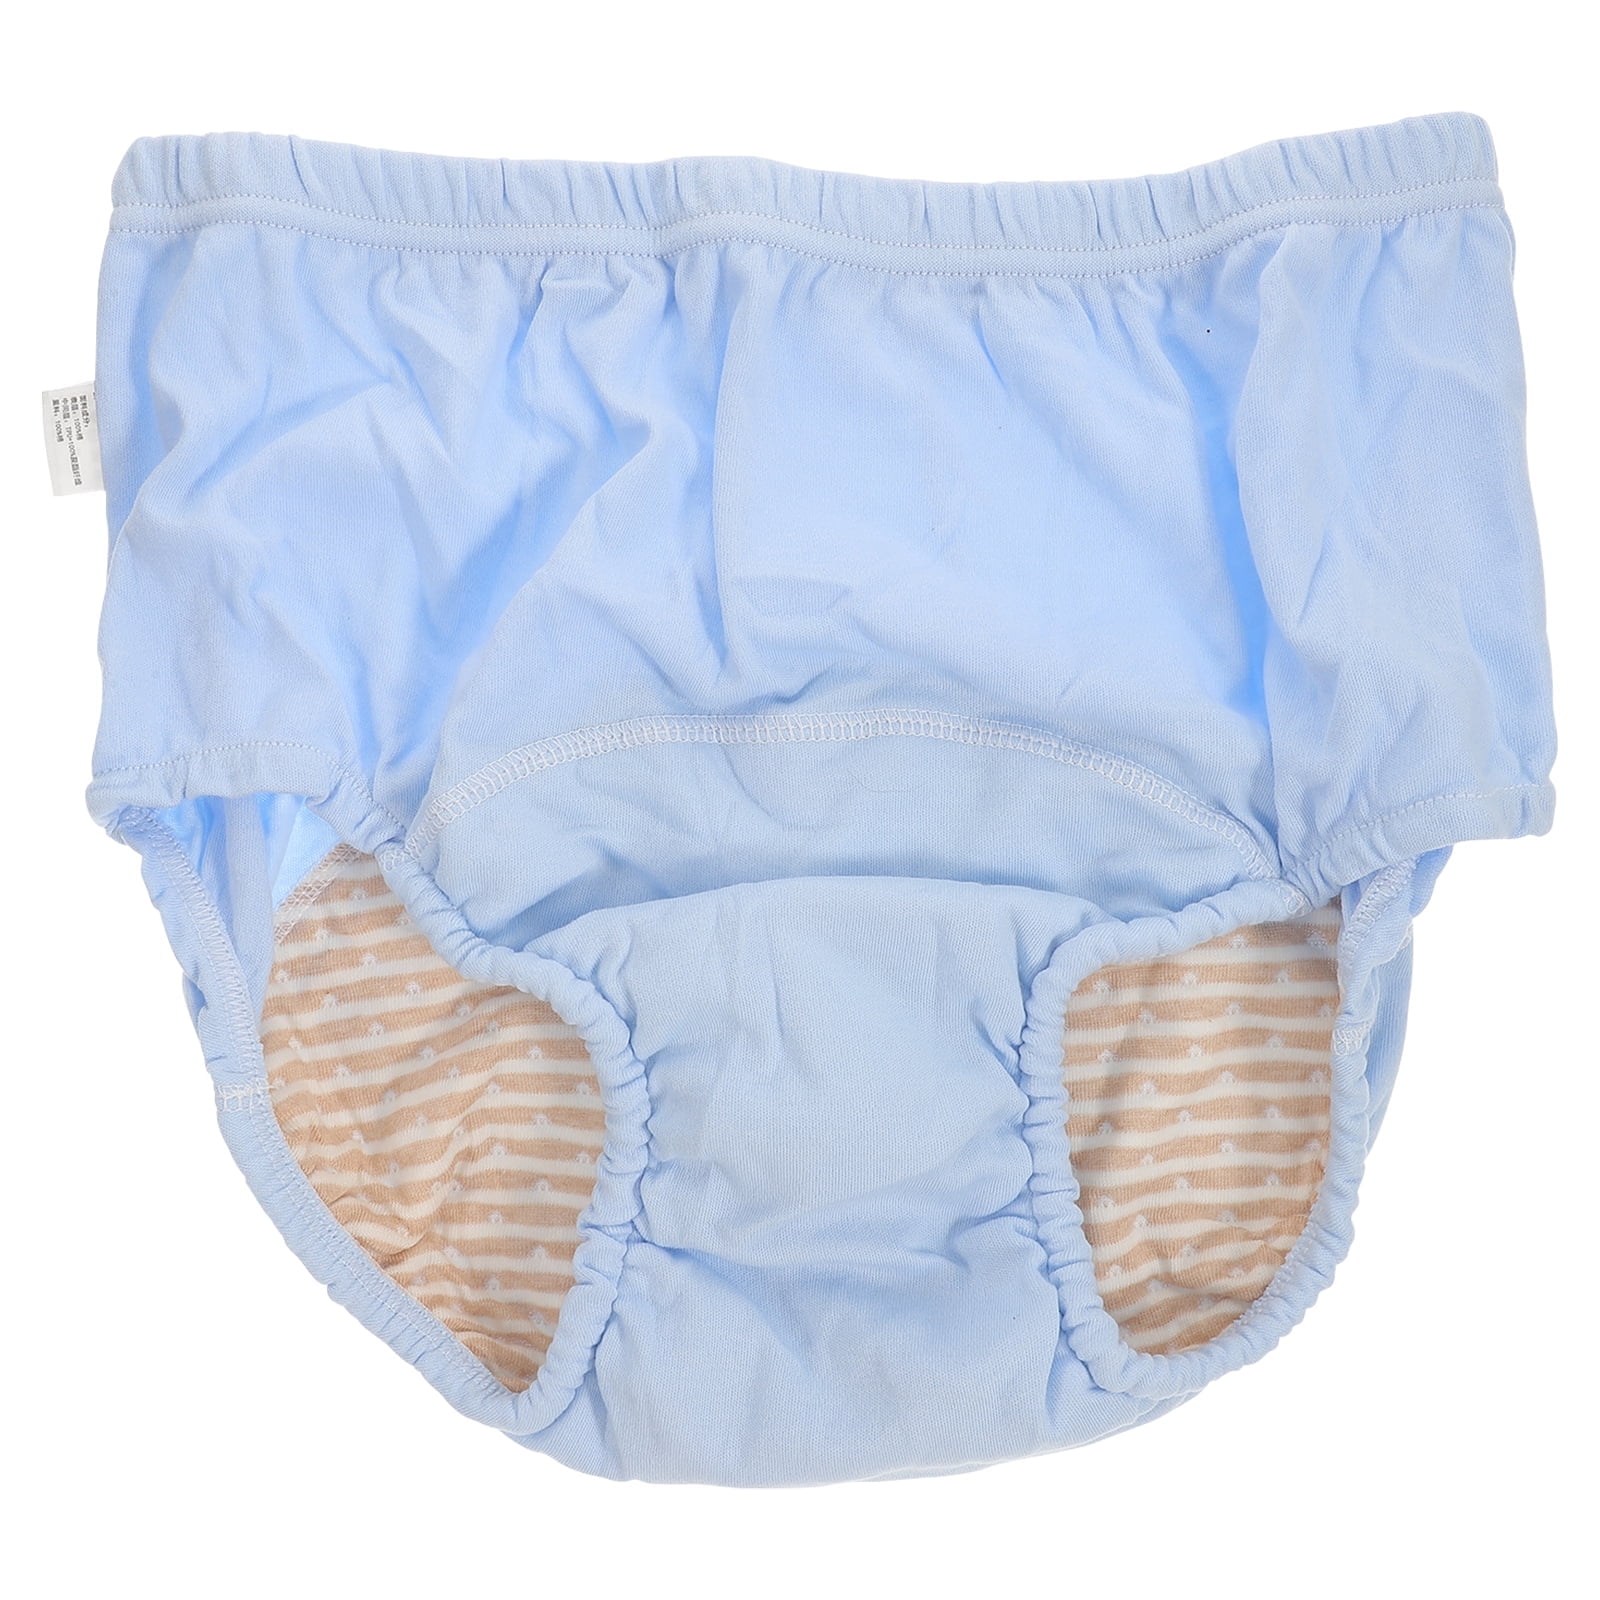 OUNONA Diaper Adult Elderly Incontinencenappies Adults Cloth Fornappy ...